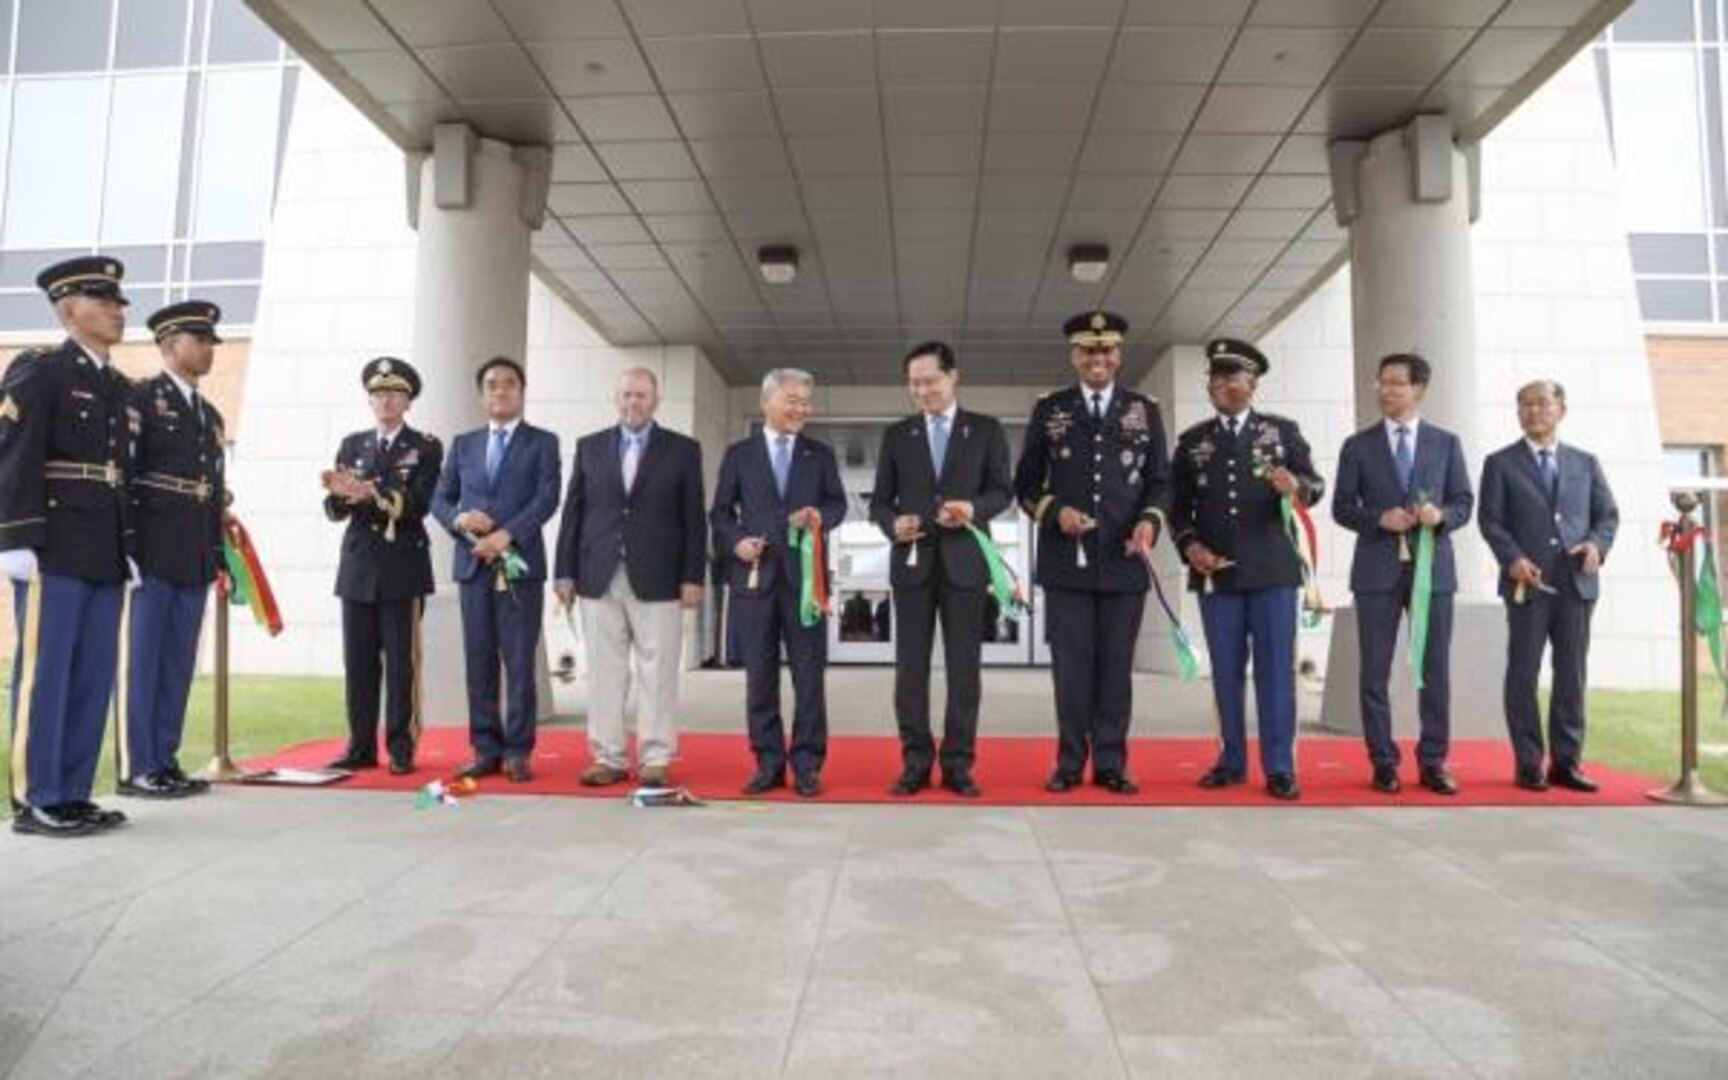 UNC/USFK Commander General Vincent K. Brooks cuts the ribbon to officially open the Vessey Complex, the new headquarters for United Nations Command and U.S. Forces Korea.